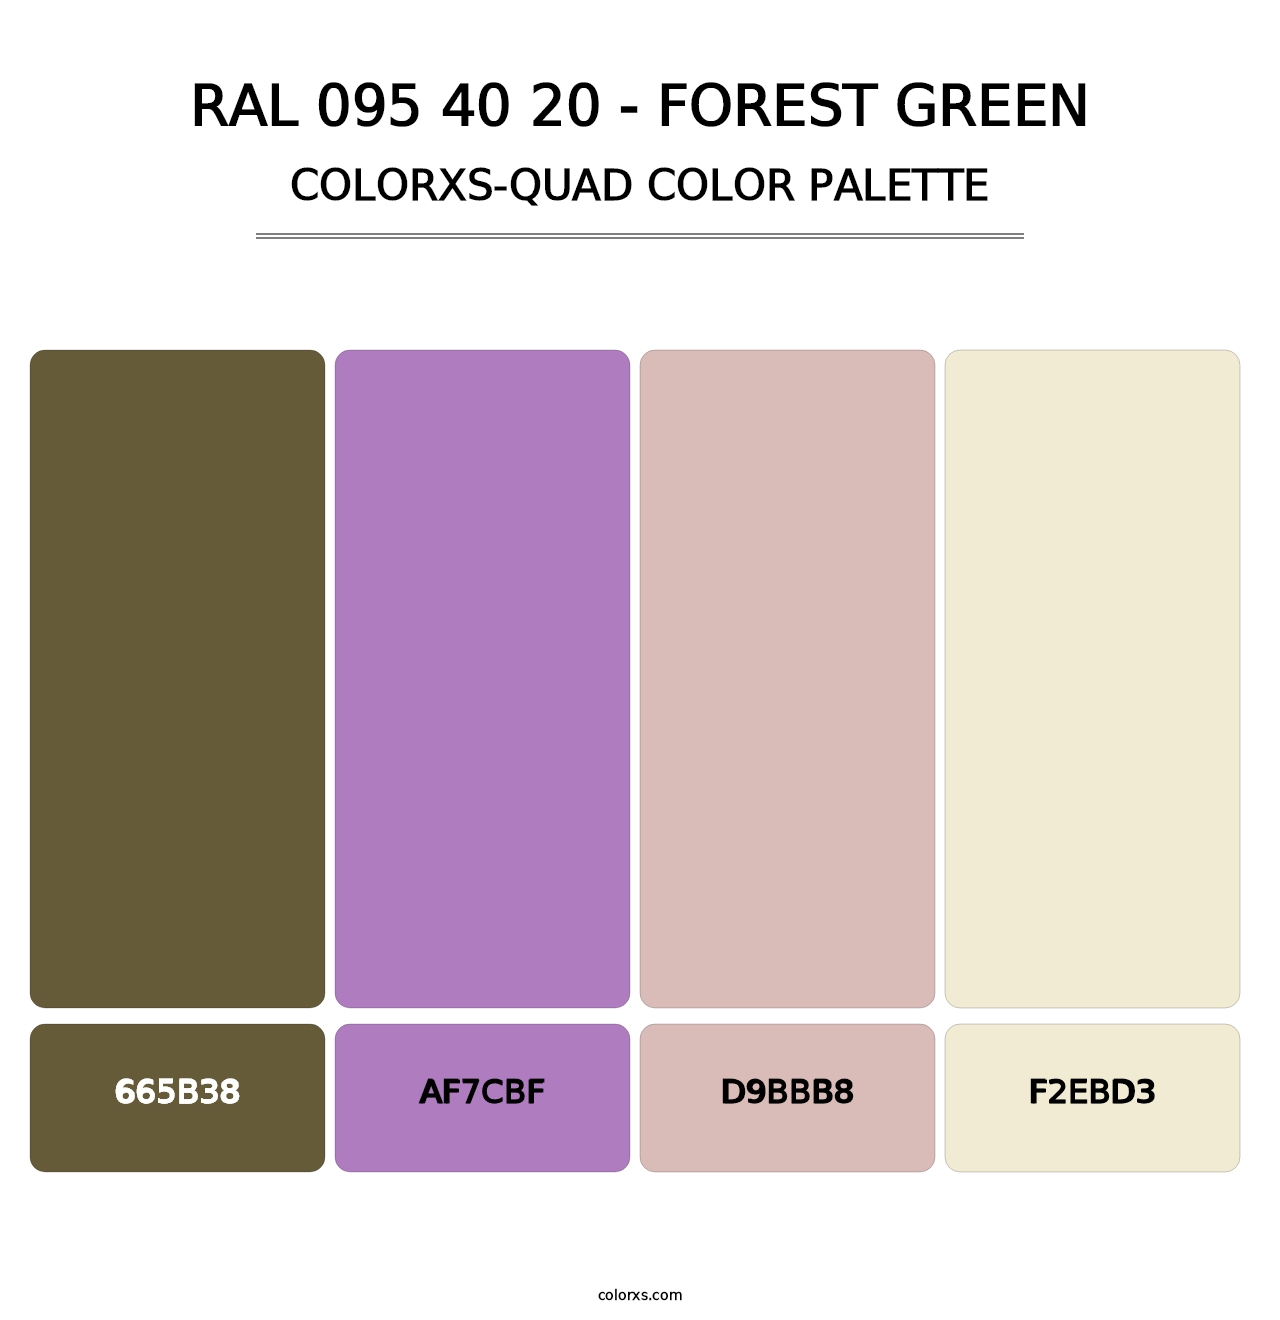 RAL 095 40 20 - Forest Green - Colorxs Quad Palette